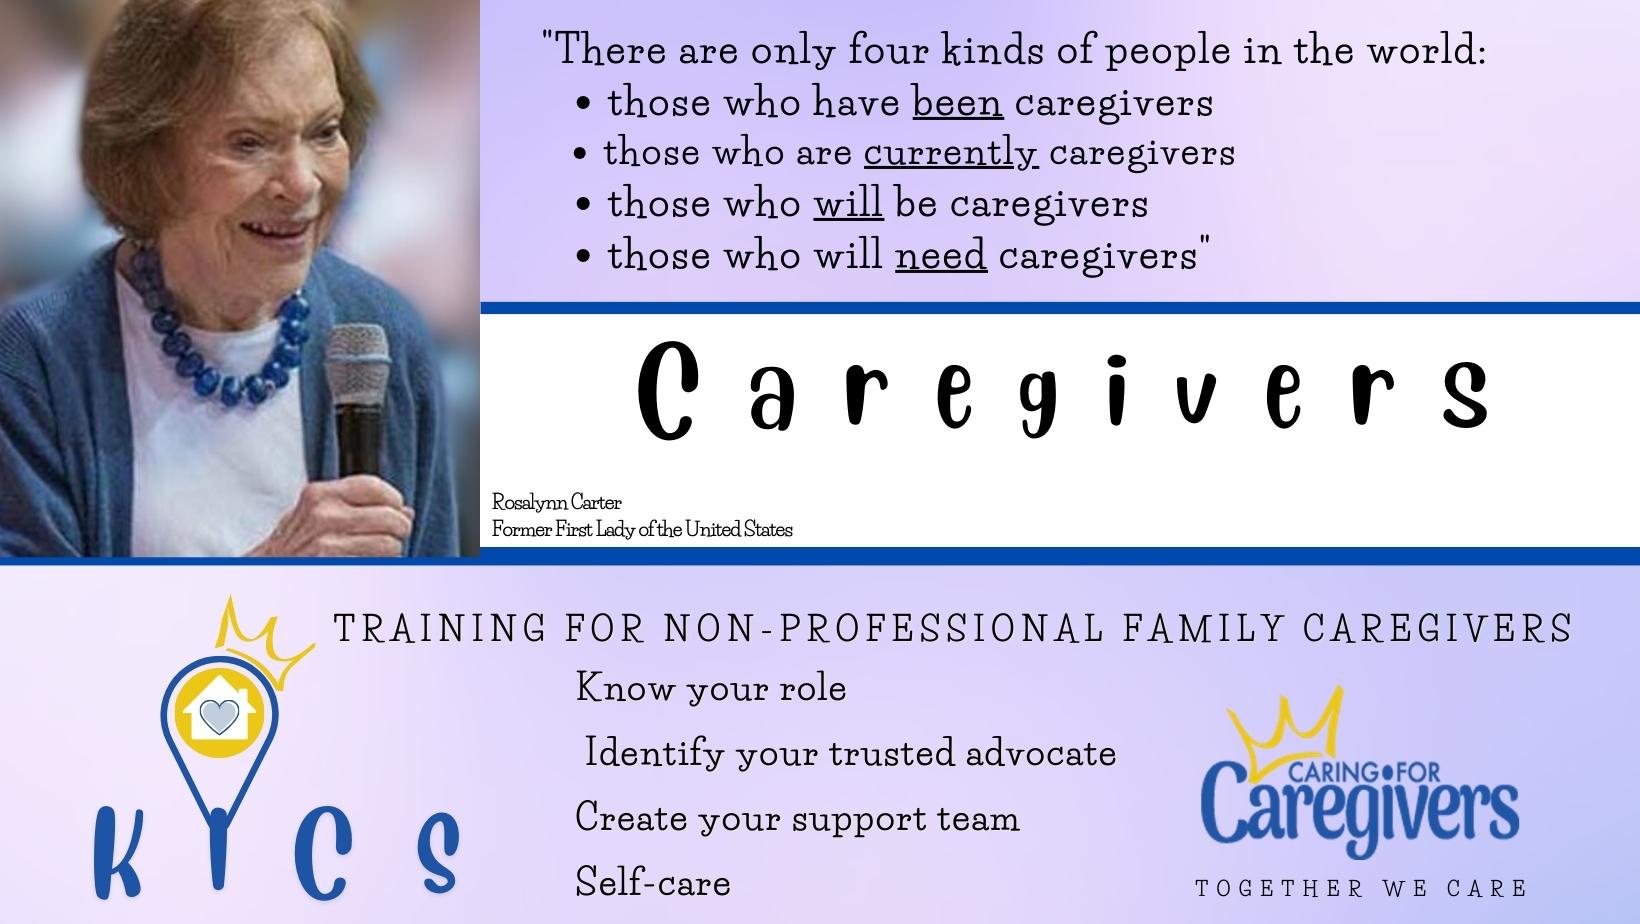 There are only four kinds of people in the world those who have been caregivers those who are currently caregivers those who will be caregivers those who will need caregivers Rosalynn Carter Former